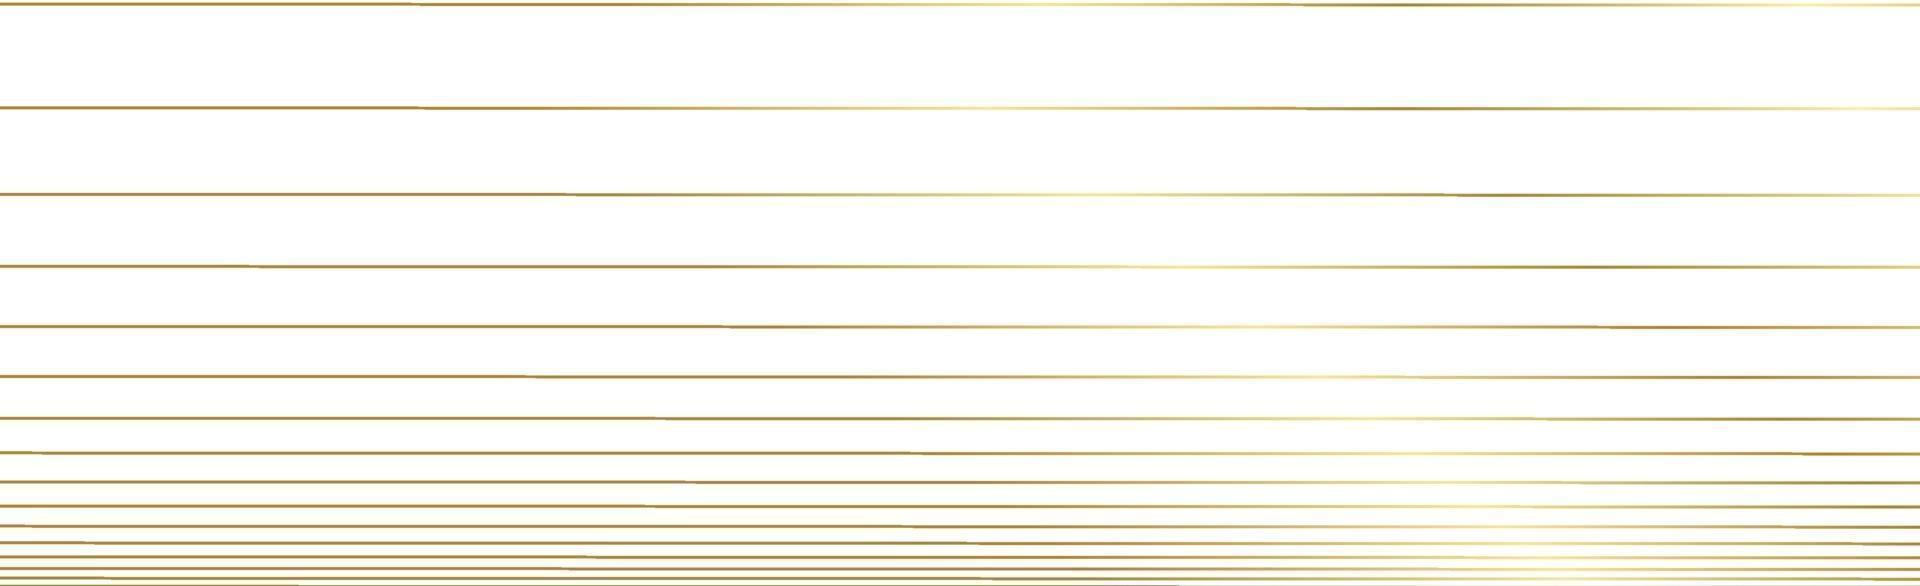 Bright golden lines on white background - Vector